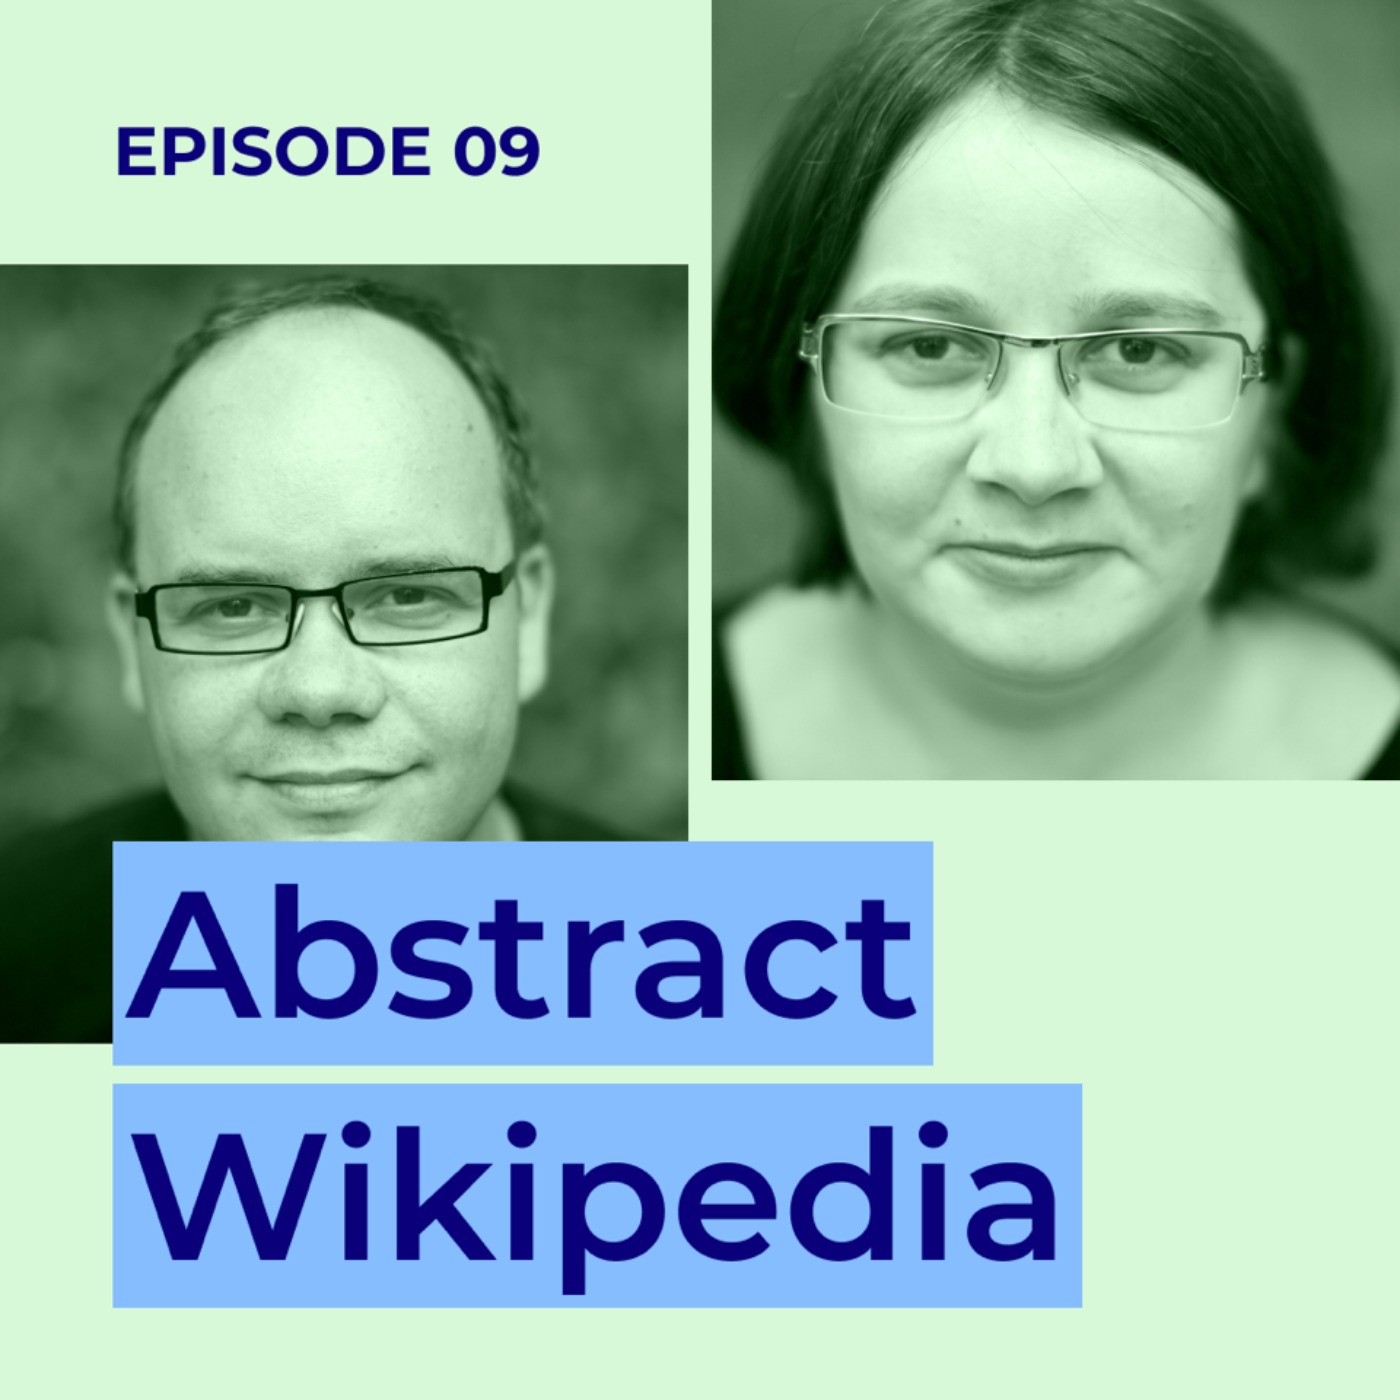 Abstract Wikipedia